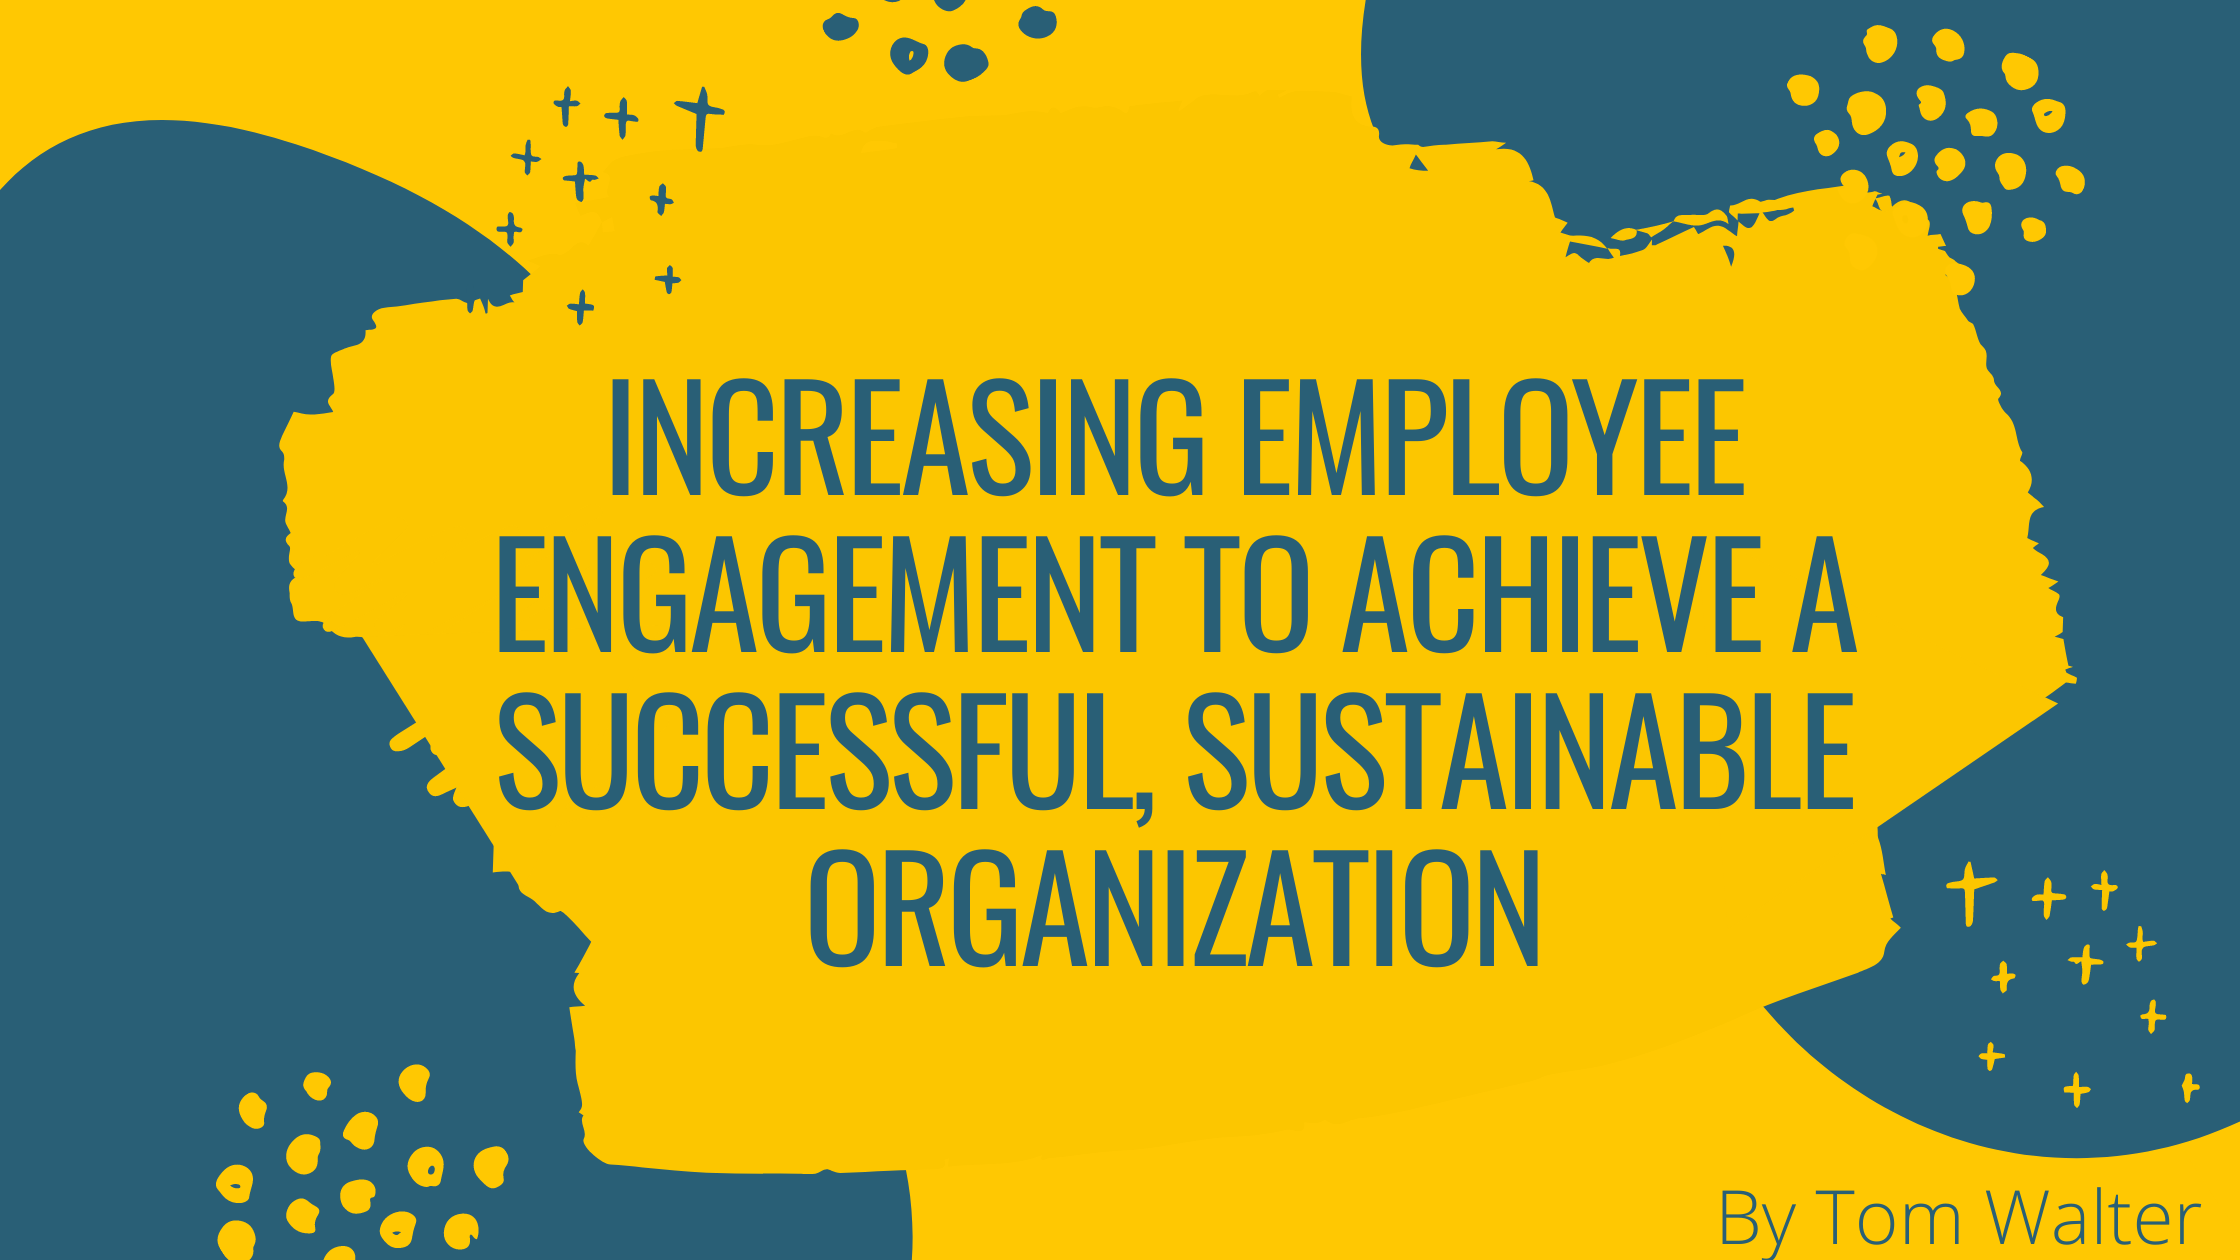 Increasing Employee Engagement to Achieve a Successful, Sustainable Organization